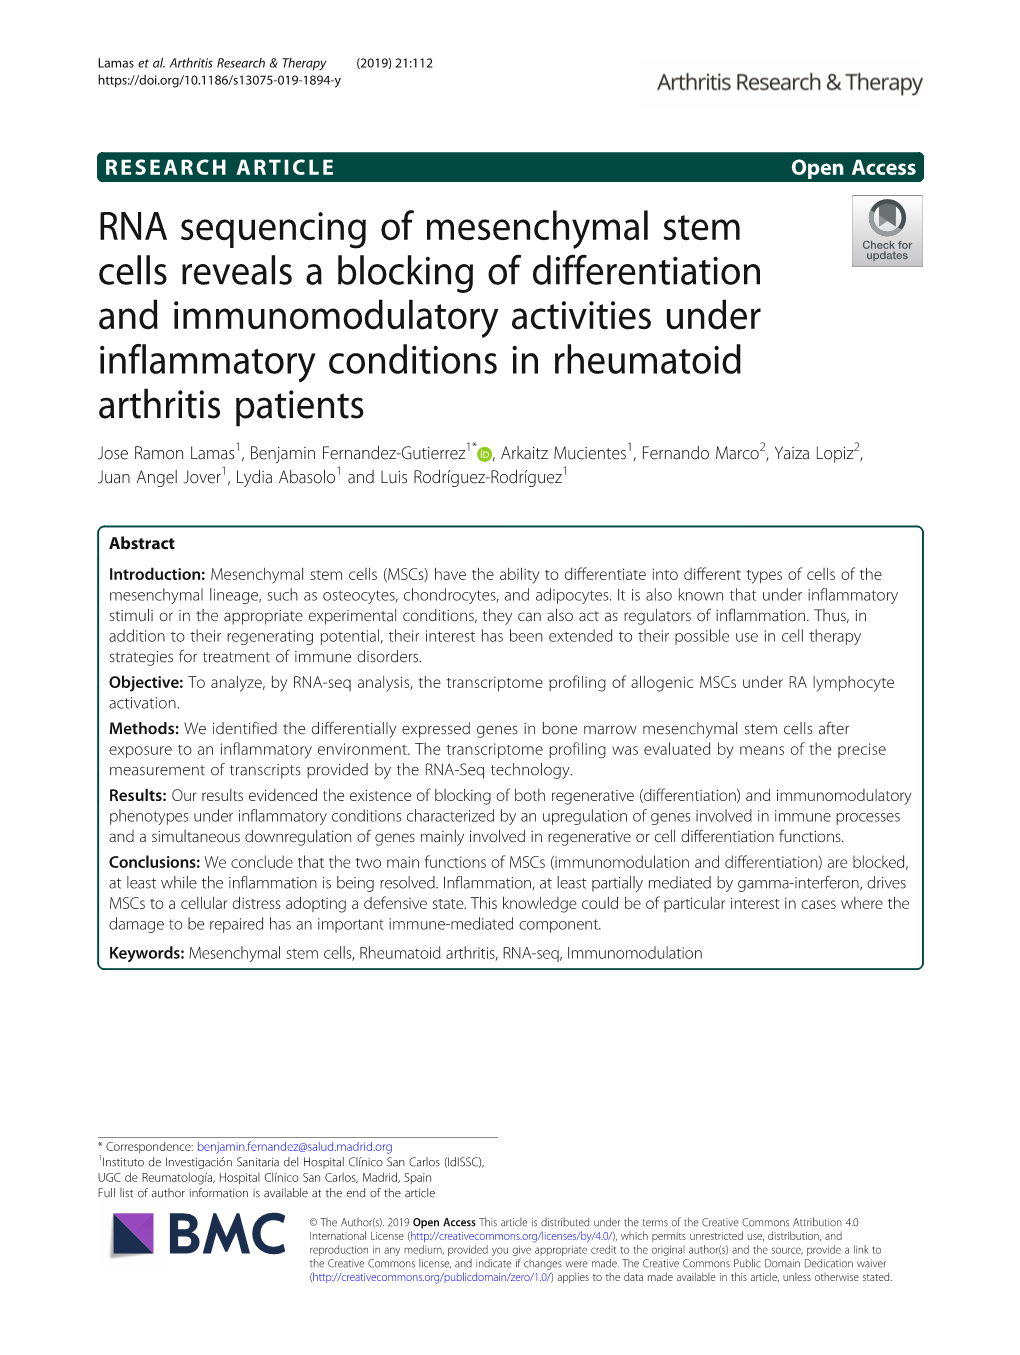 RNA Sequencing of Mesenchymal Stem Cells Reveals a Blocking Of